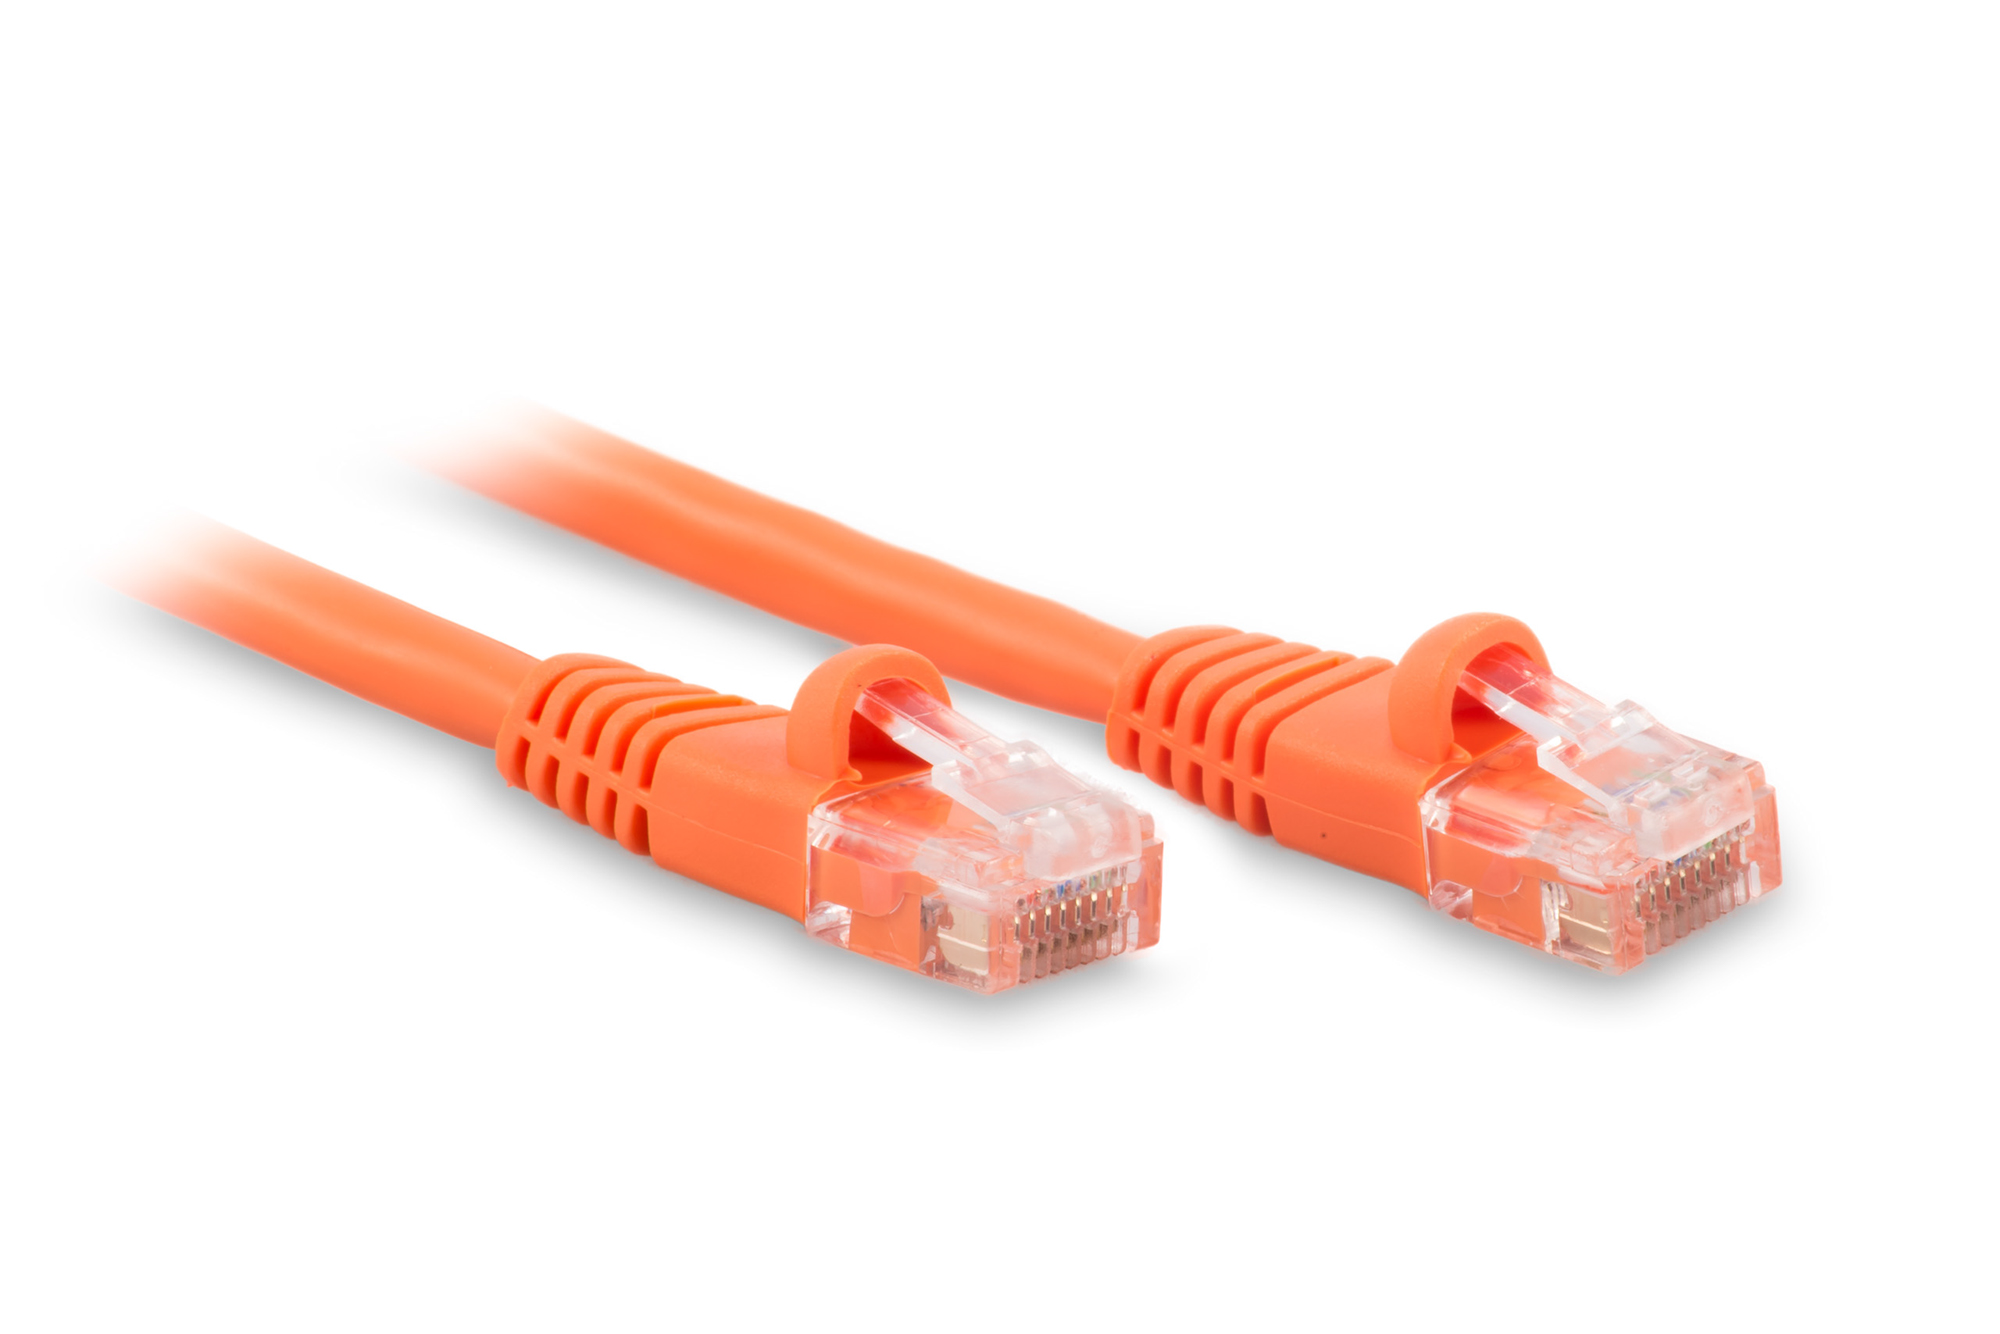 8ft Cat6 Ethernet Patch Cable - Orange Color - Snagless Boot